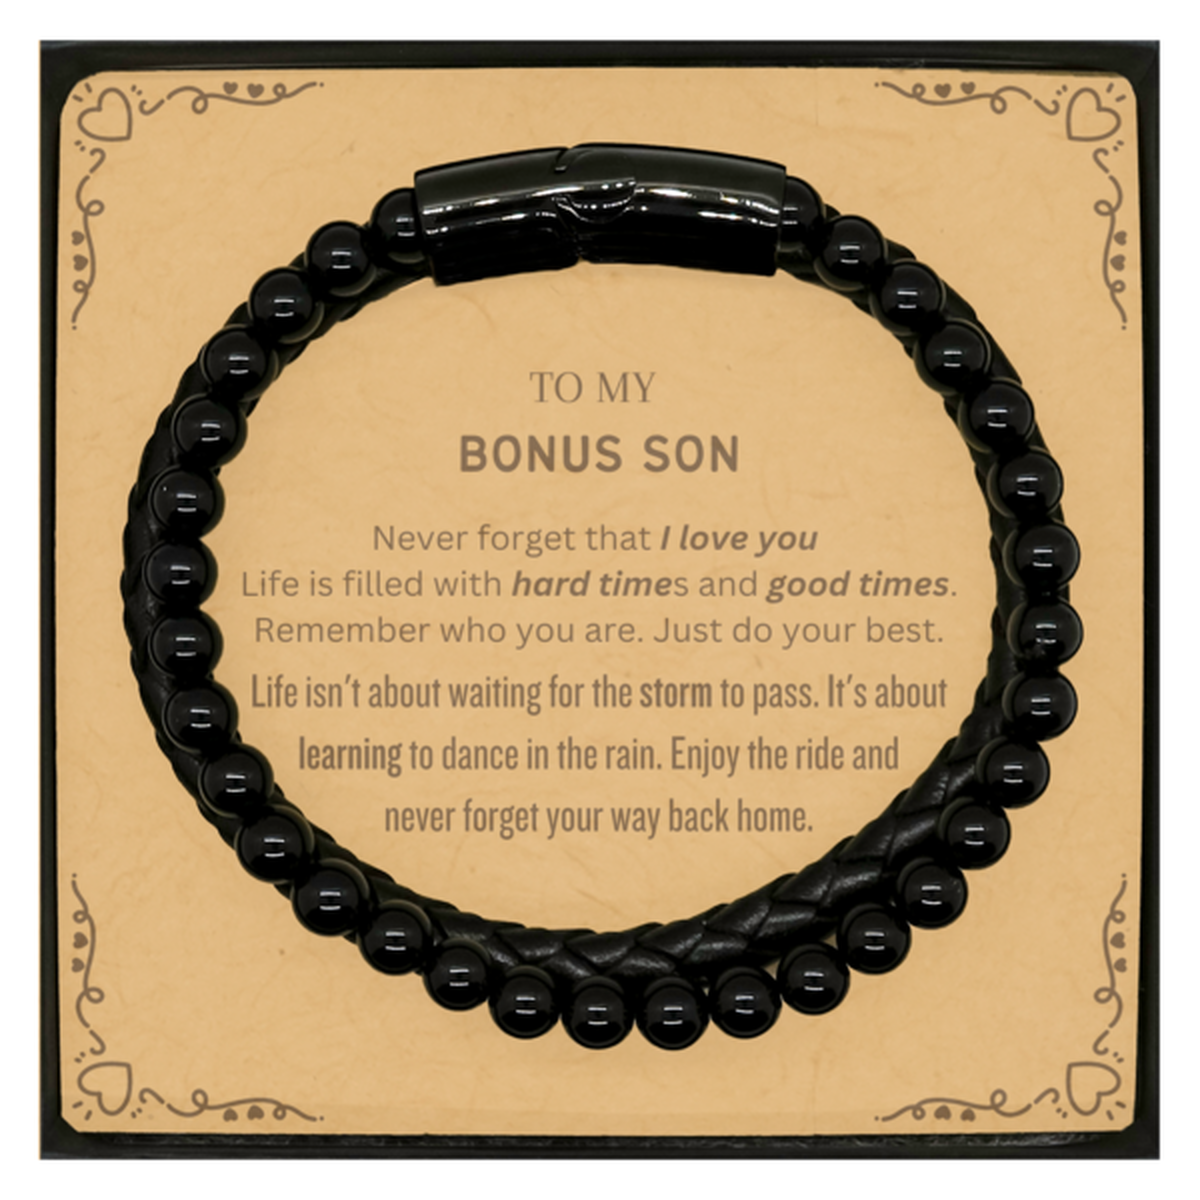 Christmas Bonus Son Stone Leather Bracelets Gifts, To My Bonus Son Birthday Thank You Gifts For Bonus Son, Graduation Unique Gifts For Bonus Son To My Bonus Son Never forget that I love you life is filled with hard times and good times. Remember who you a